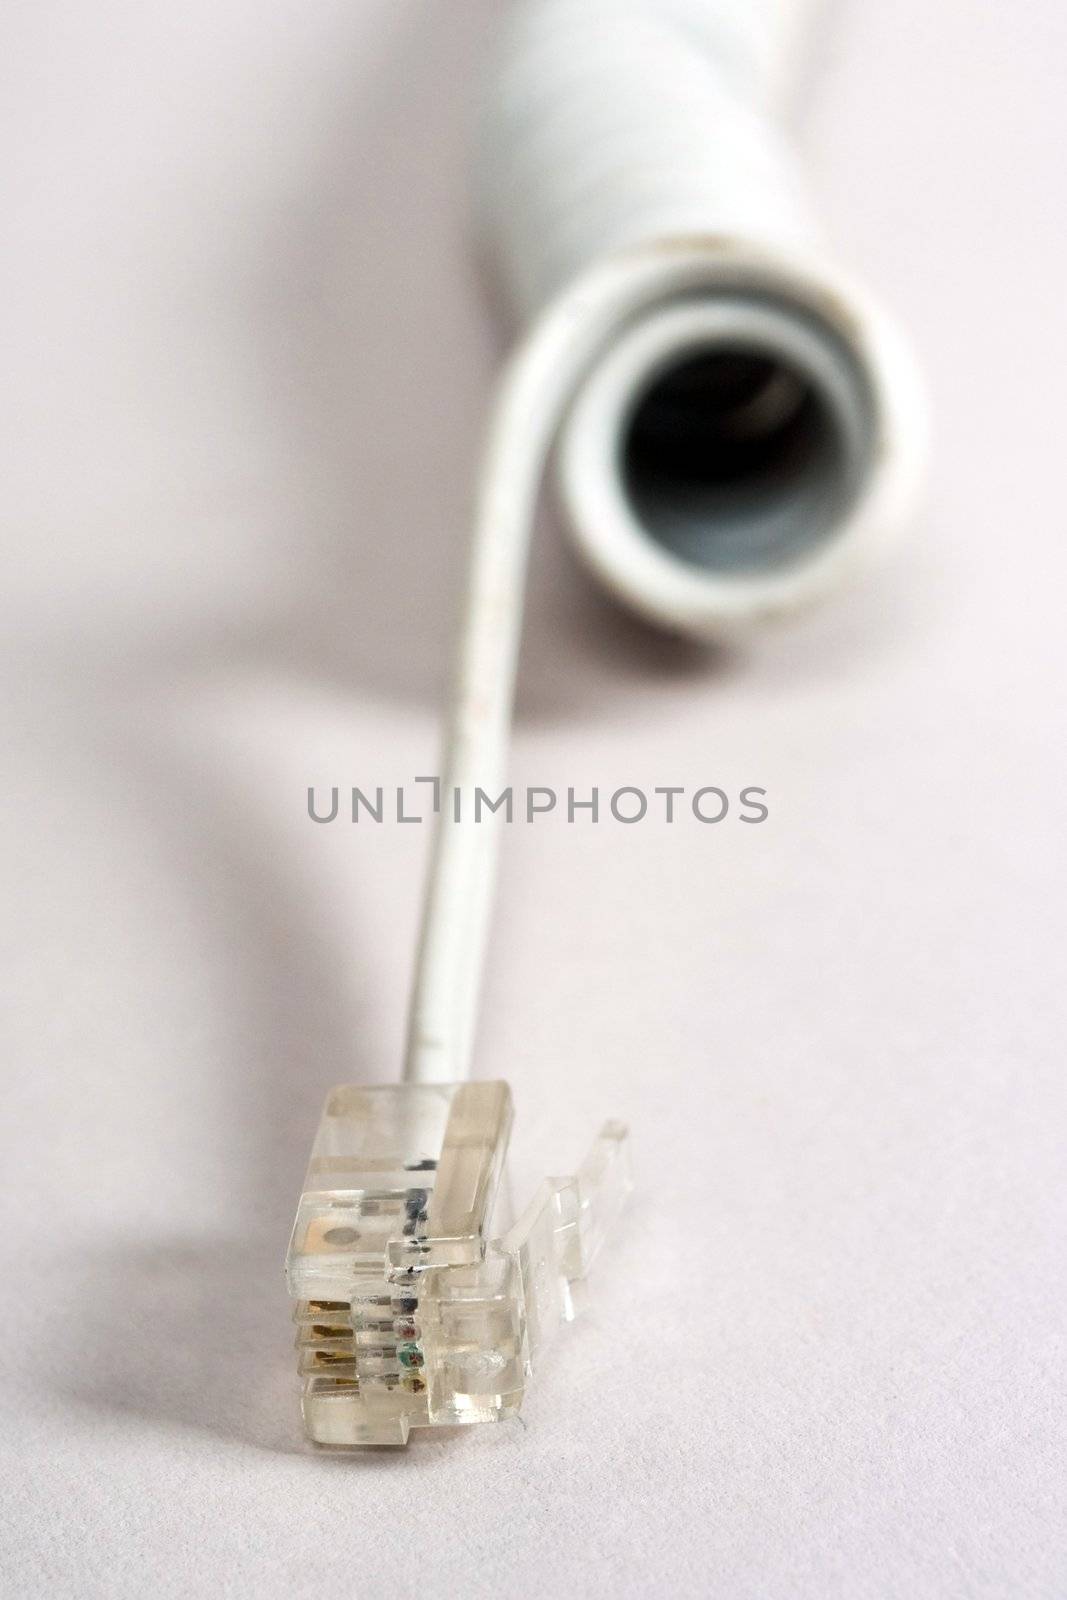 An image of connection cable on neutral background